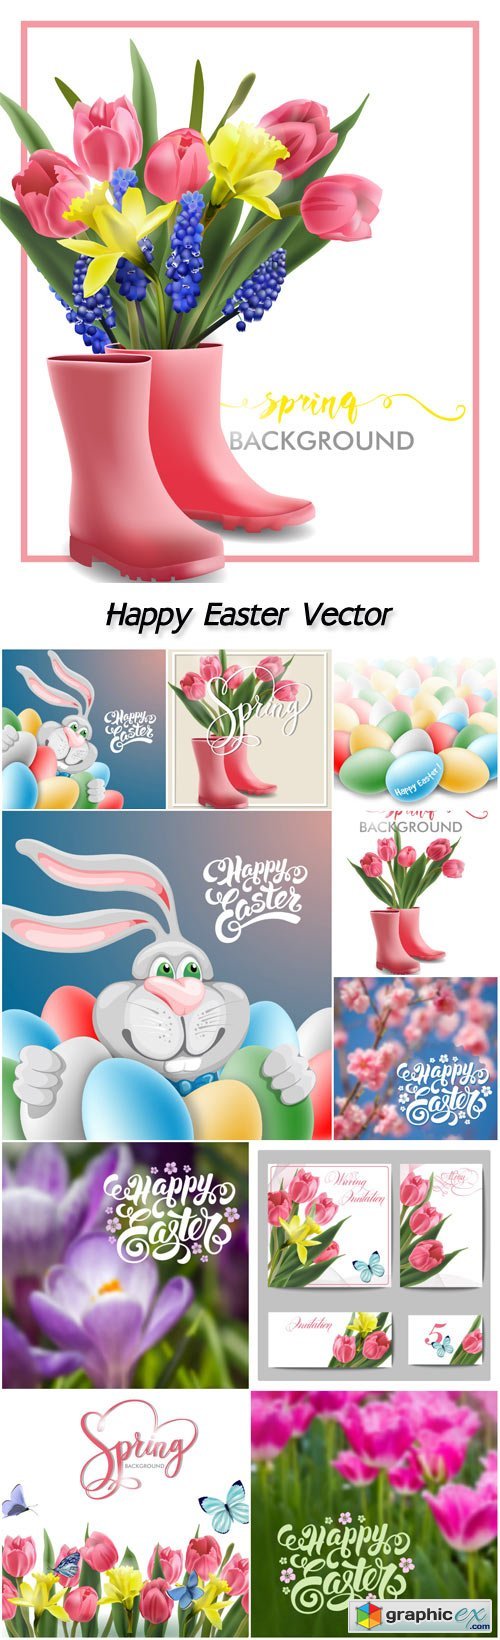 Happy Easter, spring background, flowers, pink tulips, butterflies